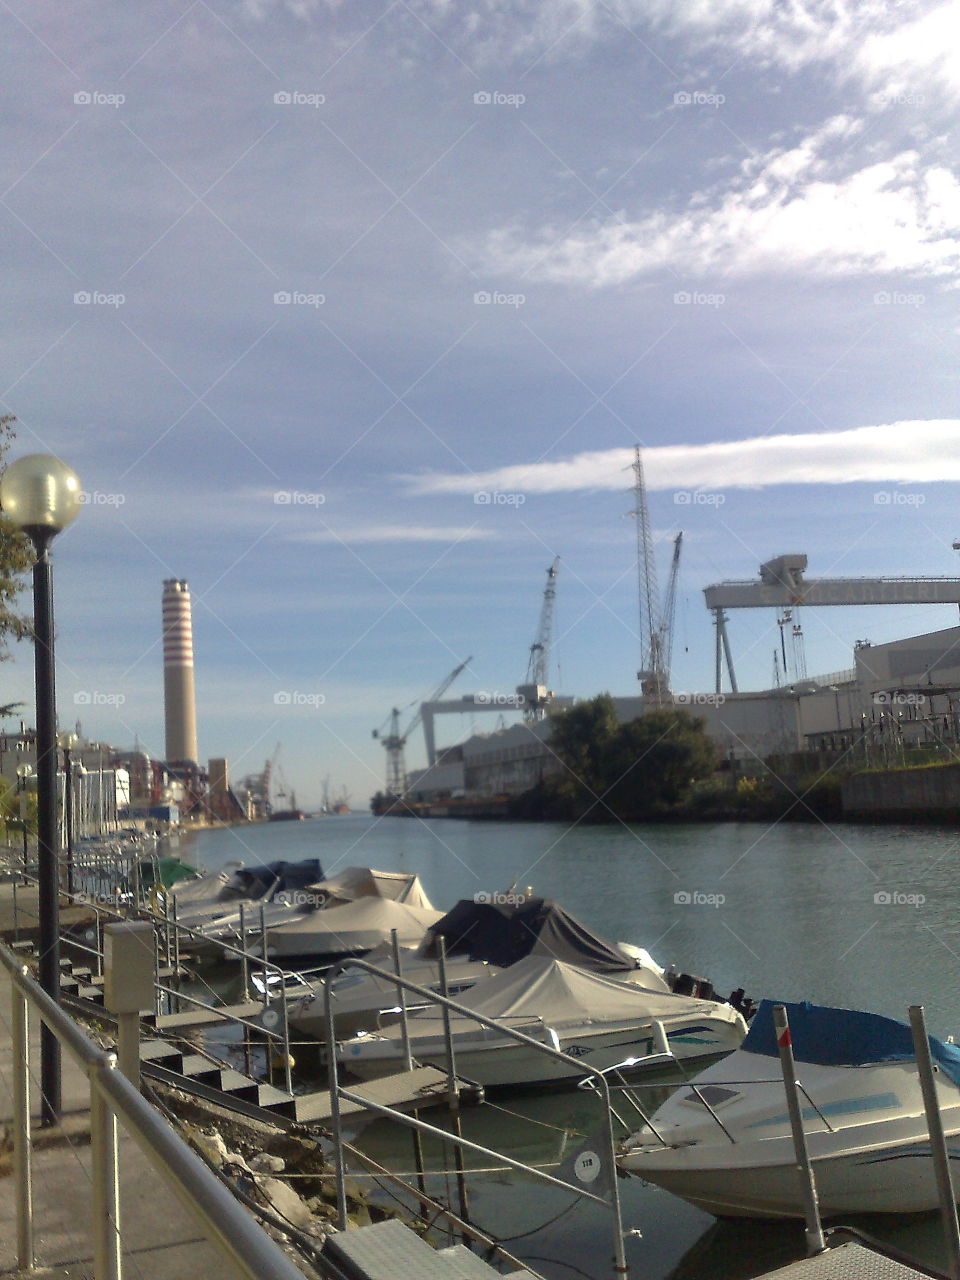 italian port, boats and landscape with chimney. shipyard